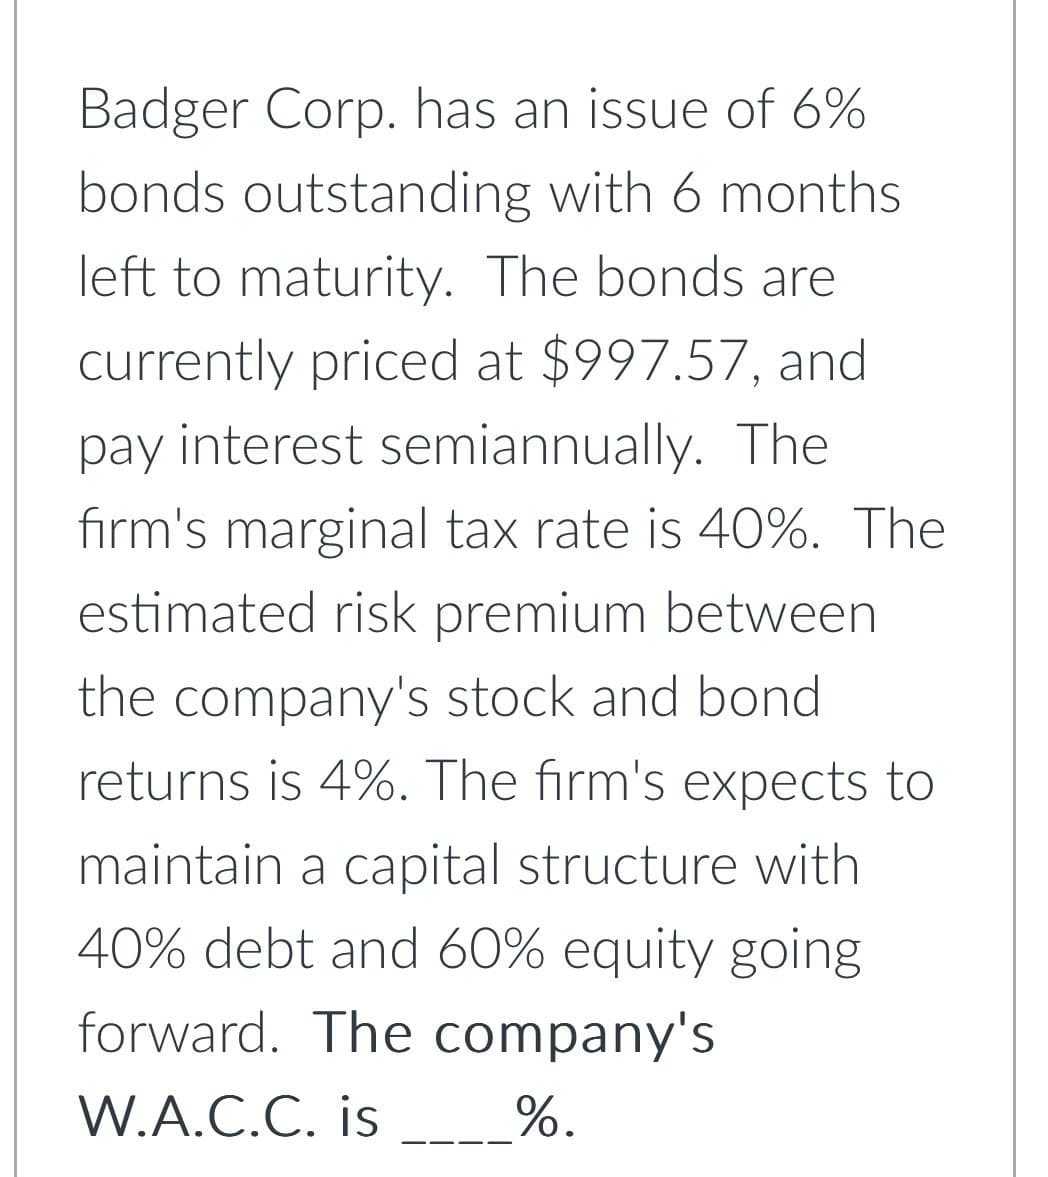 Badger Corp. has an issue of 6%
bonds outstanding with 6 months
left to maturity. The bonds are
currently priced at $997.57, and
pay interest semiannually. The
firm's marginal tax rate is 40%. The
estimated risk premium between
the company's stock and bond
returns is 4%. The firm's expects to
maintain a capital structure with
40% debt and 60% equity going
forward. The company's
W.A.C.C. is
%.